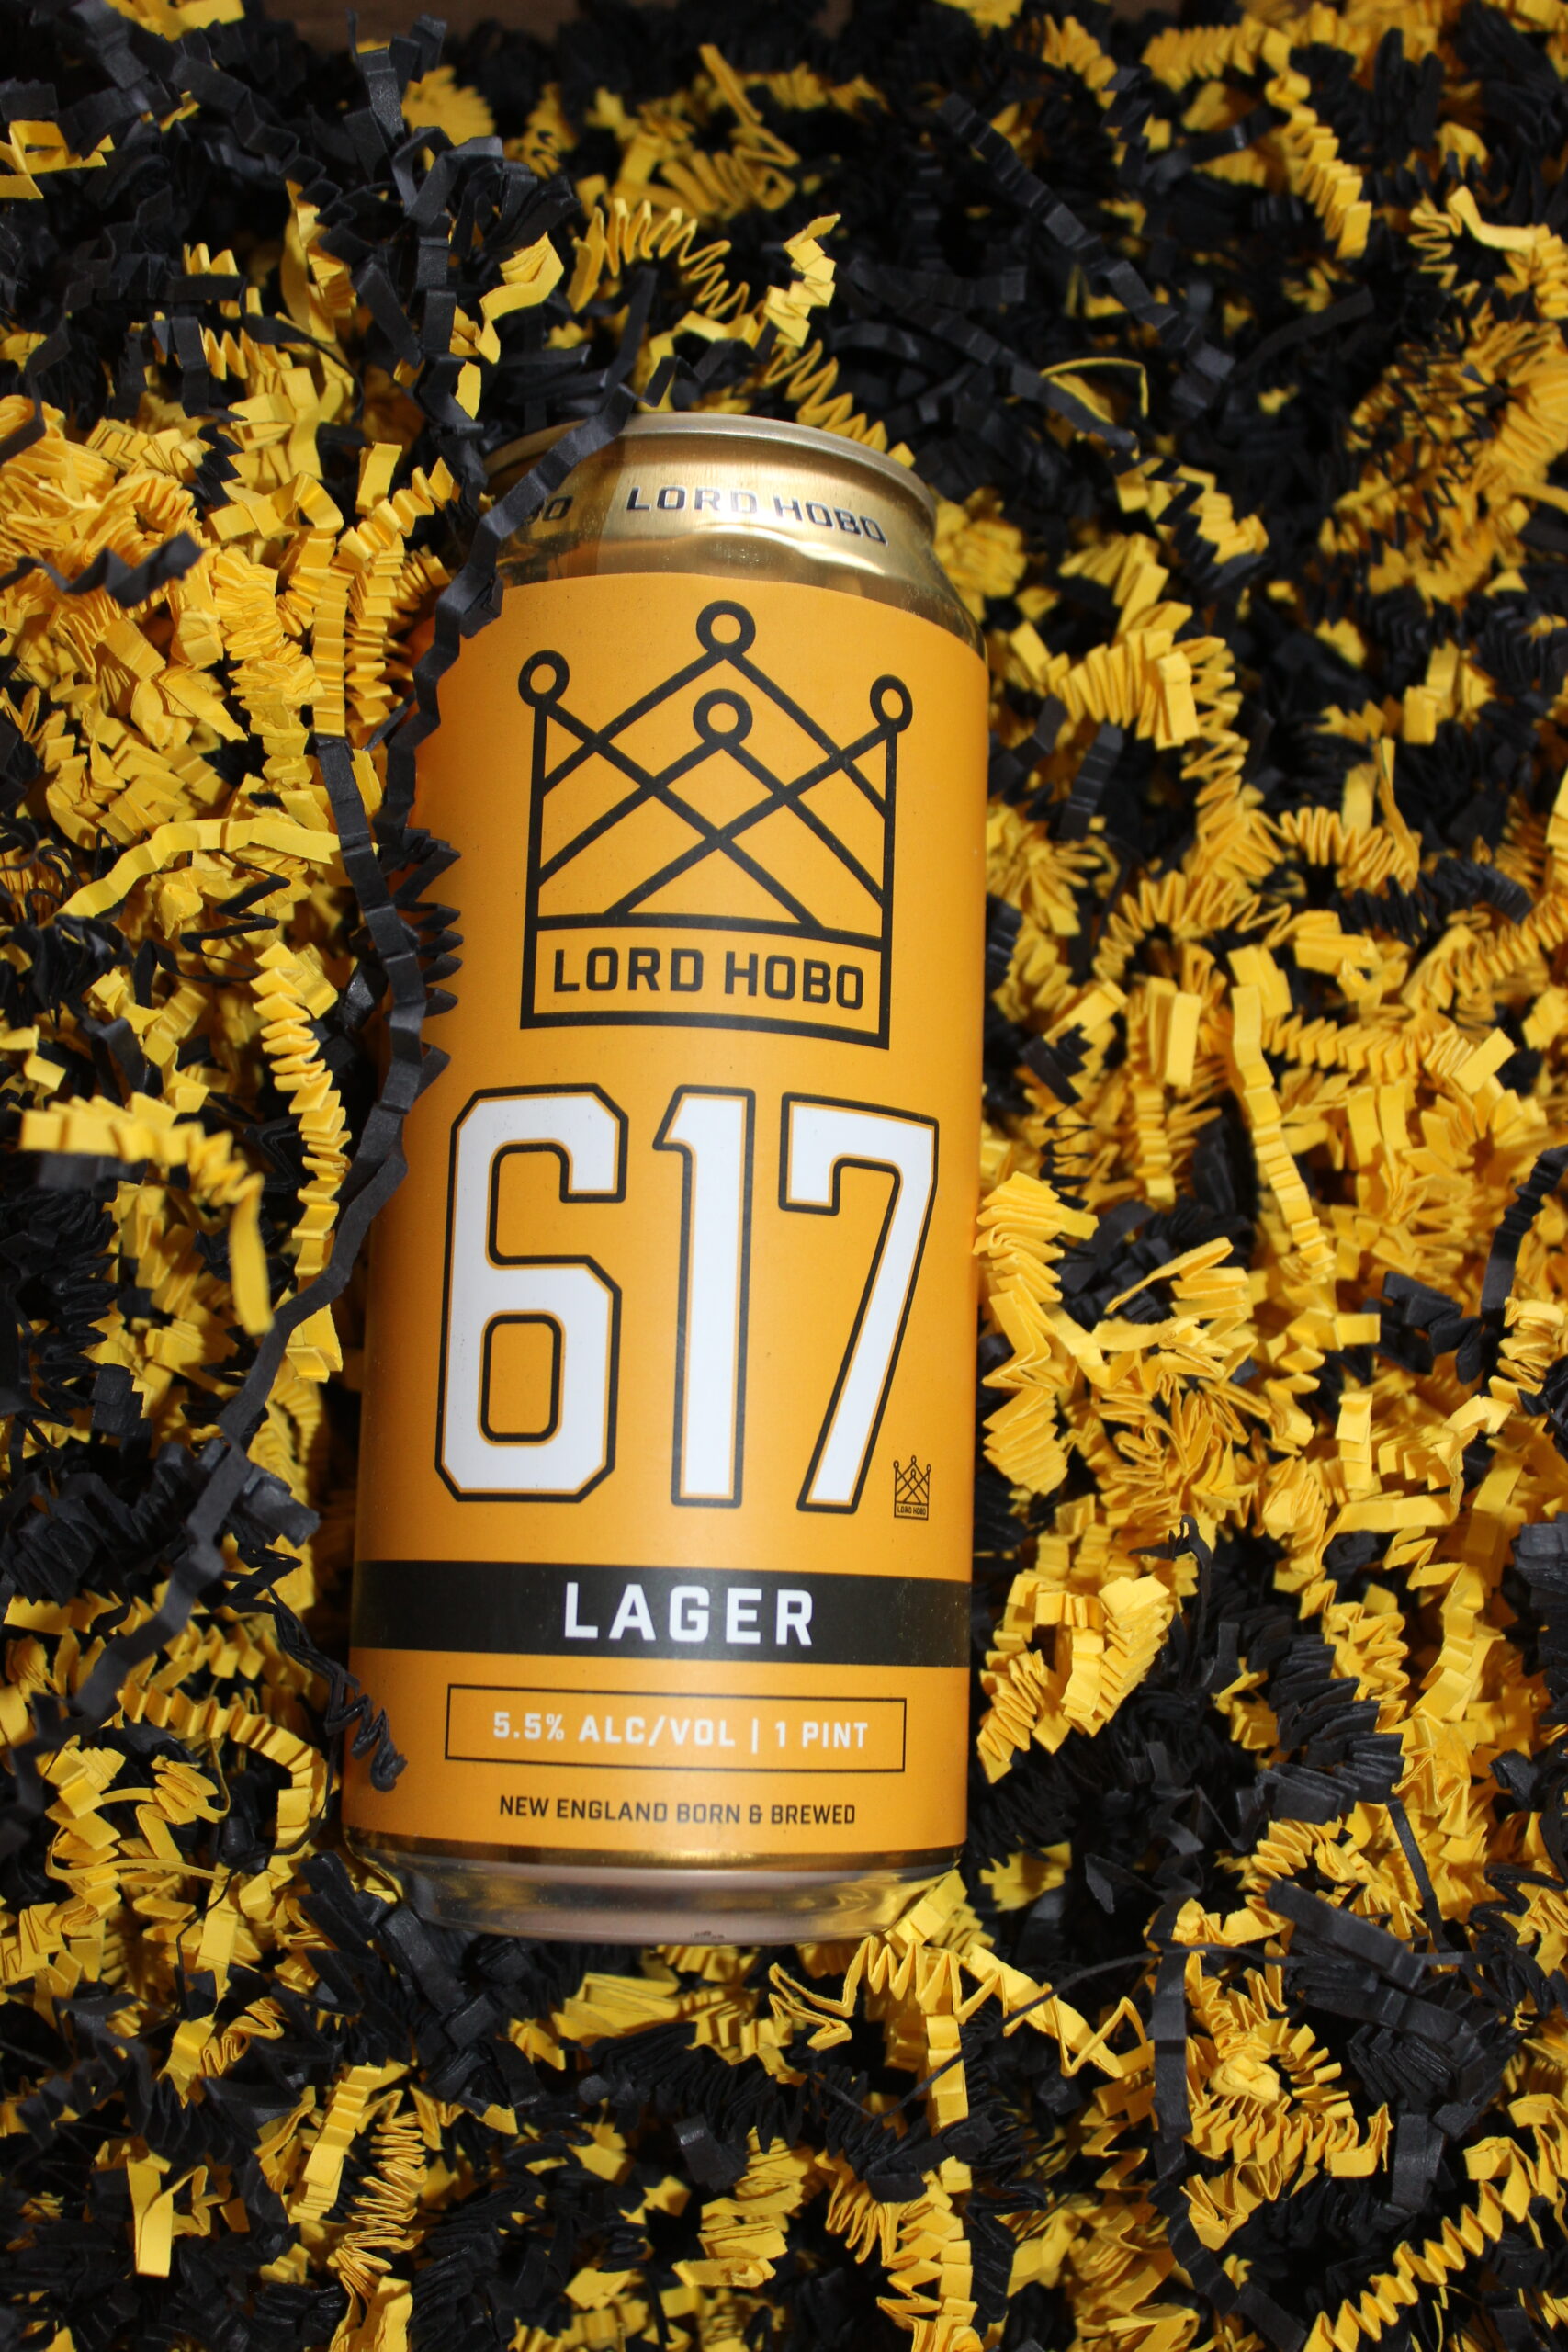 Lord Hobo Expands Their Portfolio by Introducing 617 Lager